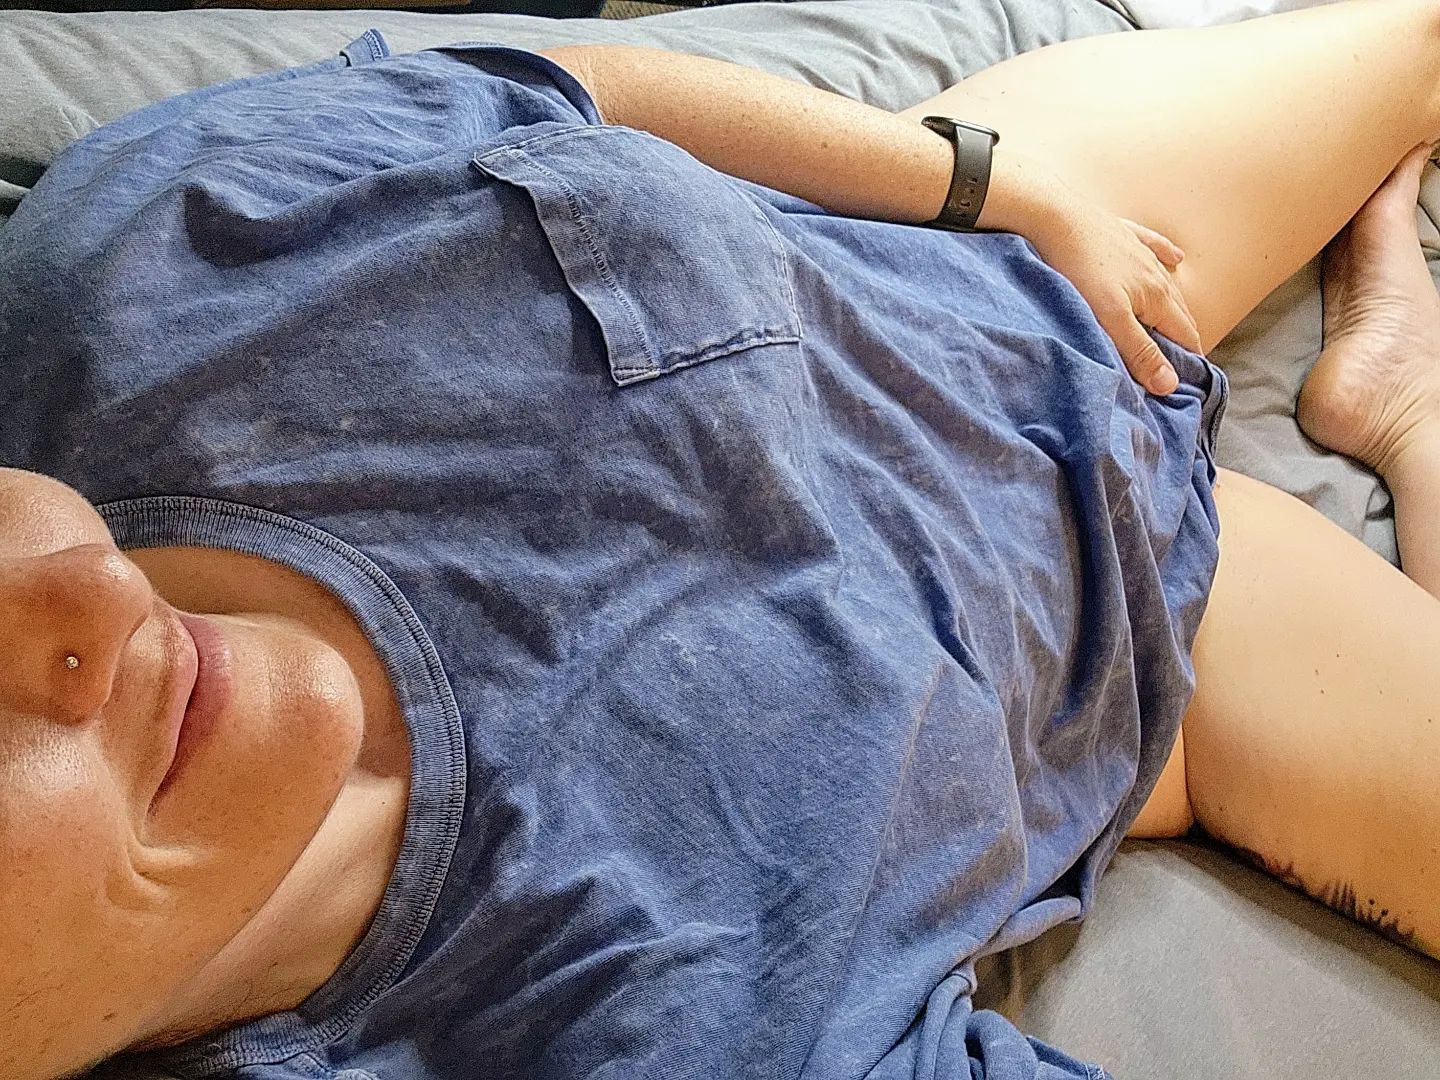 I Hope Ur Weekend is Full of Inappropriate Behavior! 

#inappropriate #inappropriatebehavior 
#saturday #saturdaymorning #saturdayvibes 
#goodmorning #goodvibes 
#tshirt #tshirtonly #inbed #cumplay